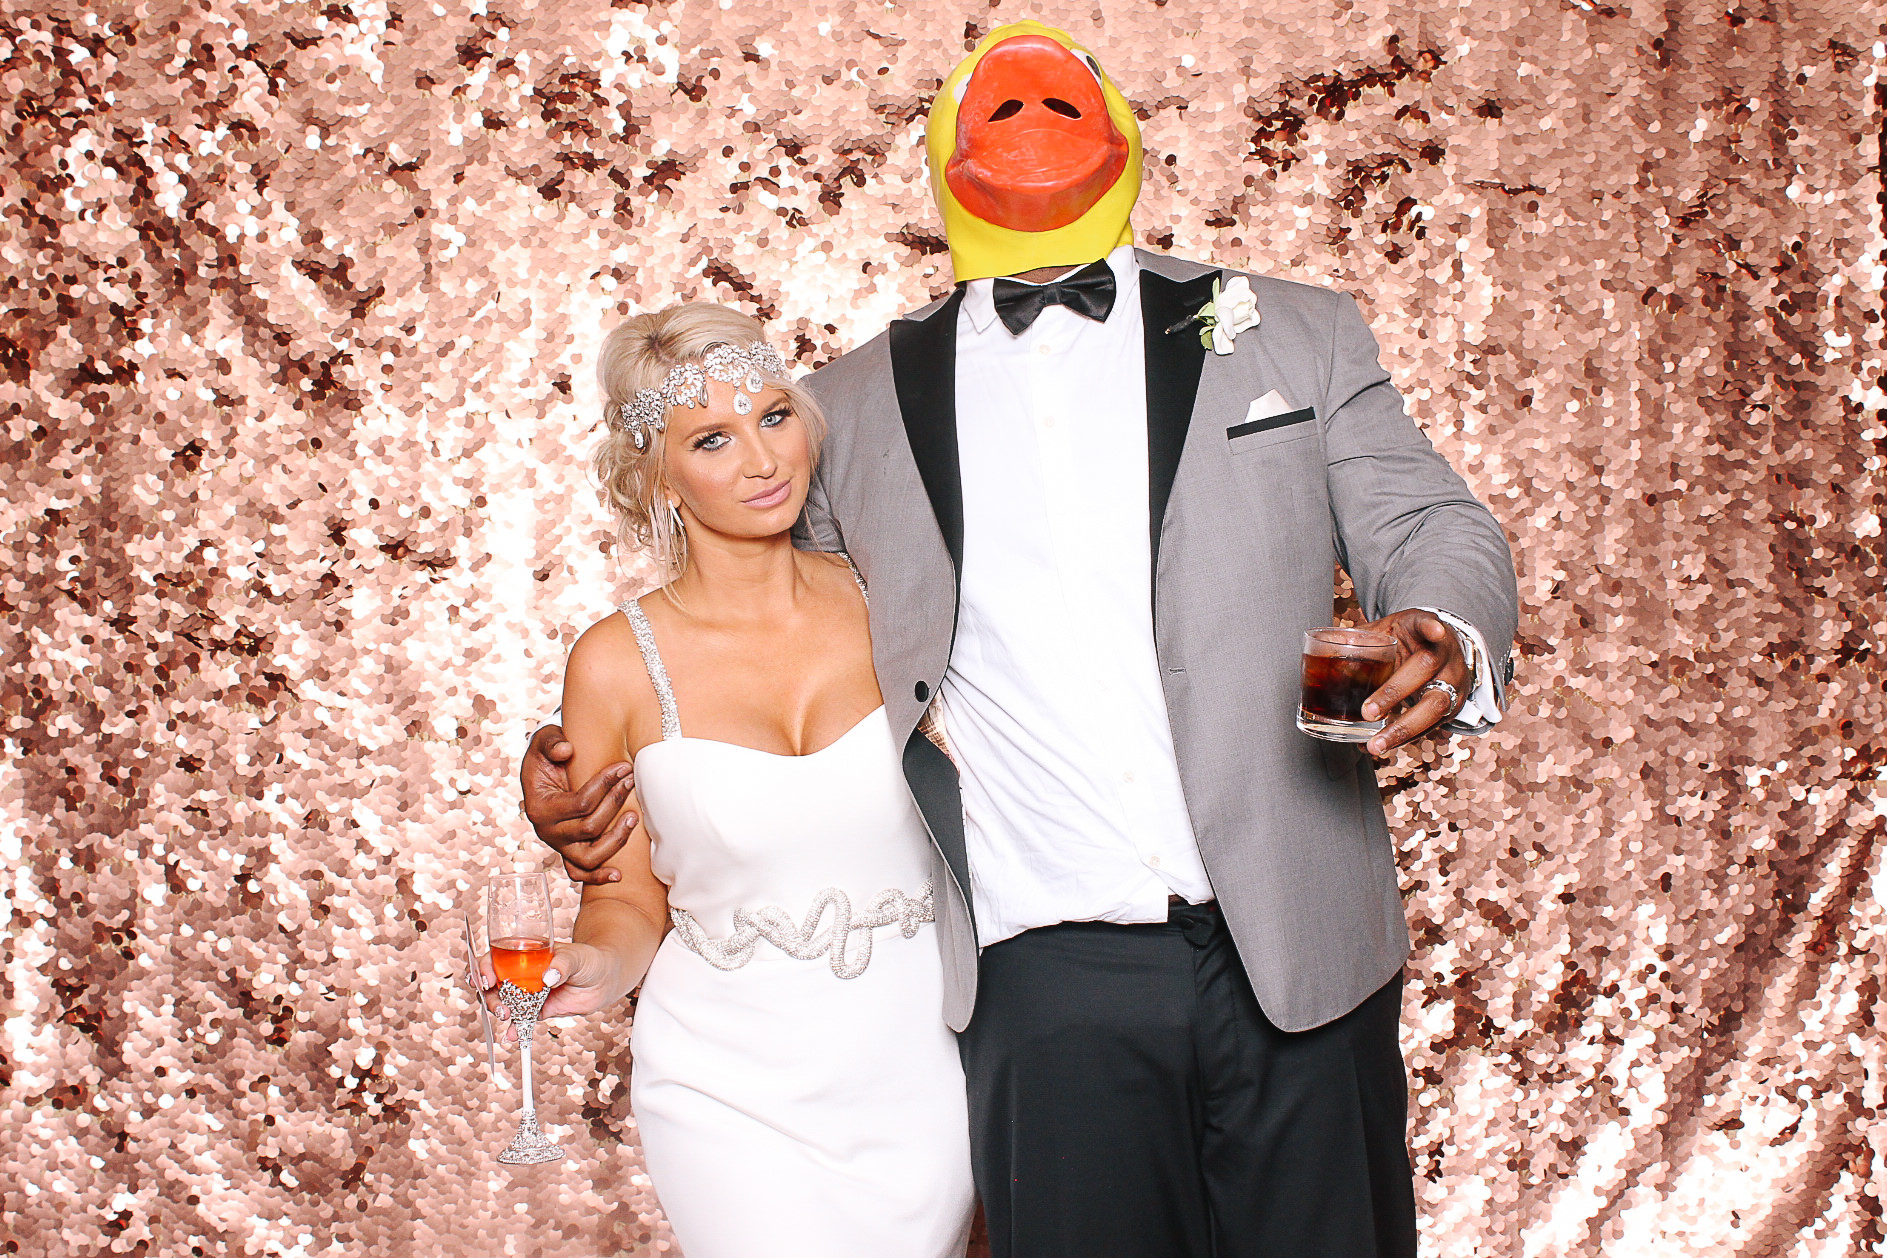 00001 Dajana and Phil Taylor Wedding Photos photobooth by too much awesomeness.jpg